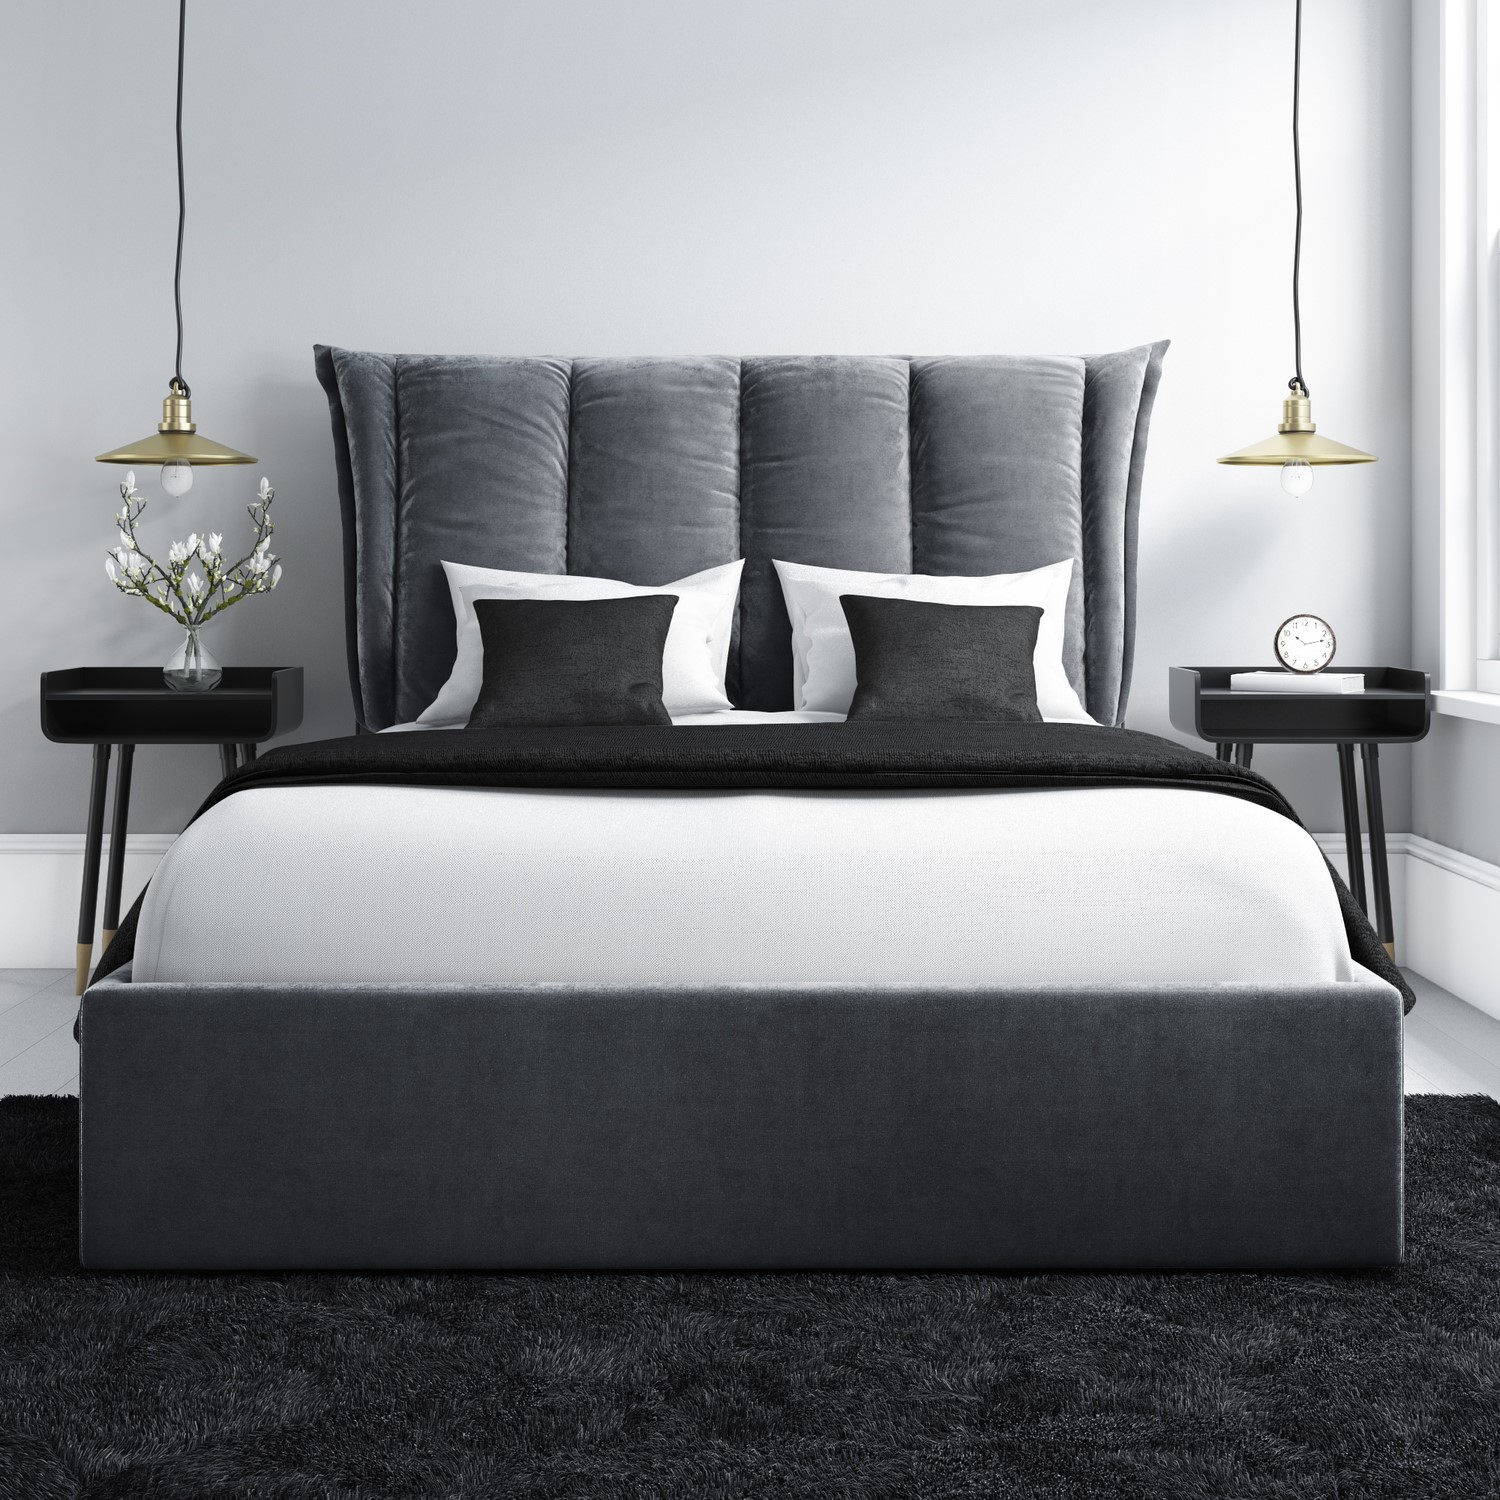 Grey Velvet King Size Ottoman Bed With, How To Build A Headboard For A King Size Bed